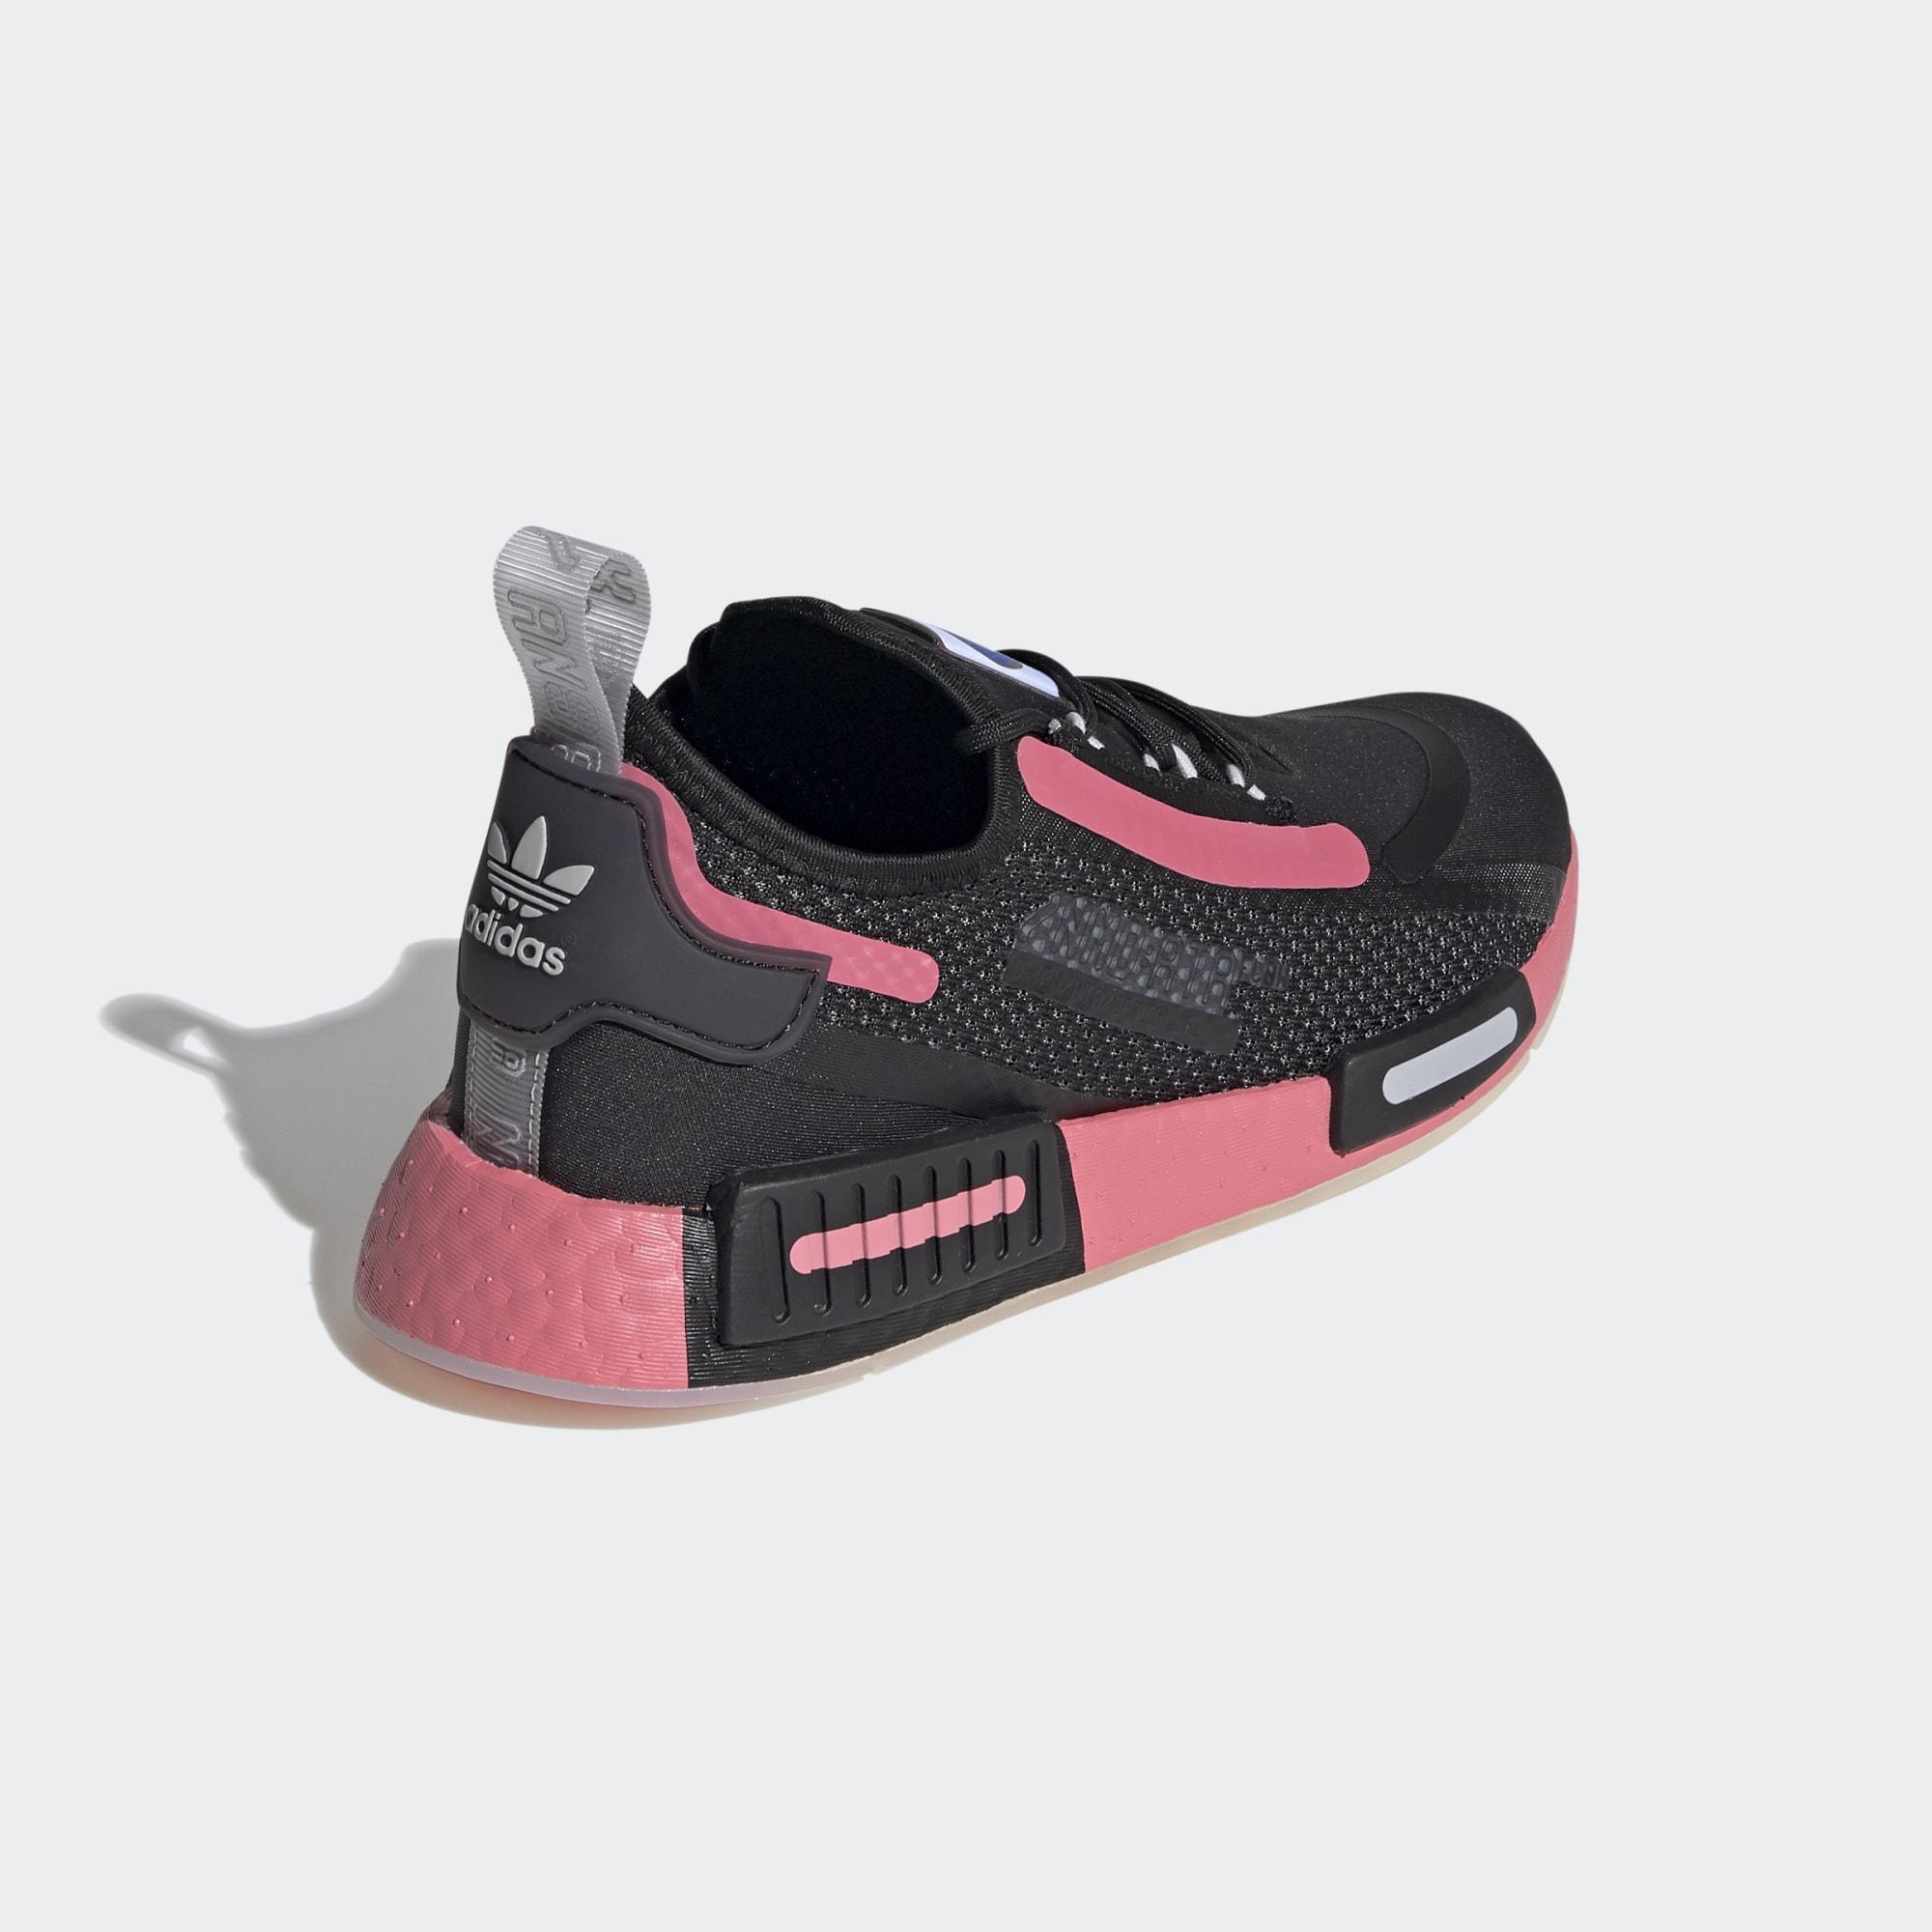 nmd_r1 spectoo shoes women's